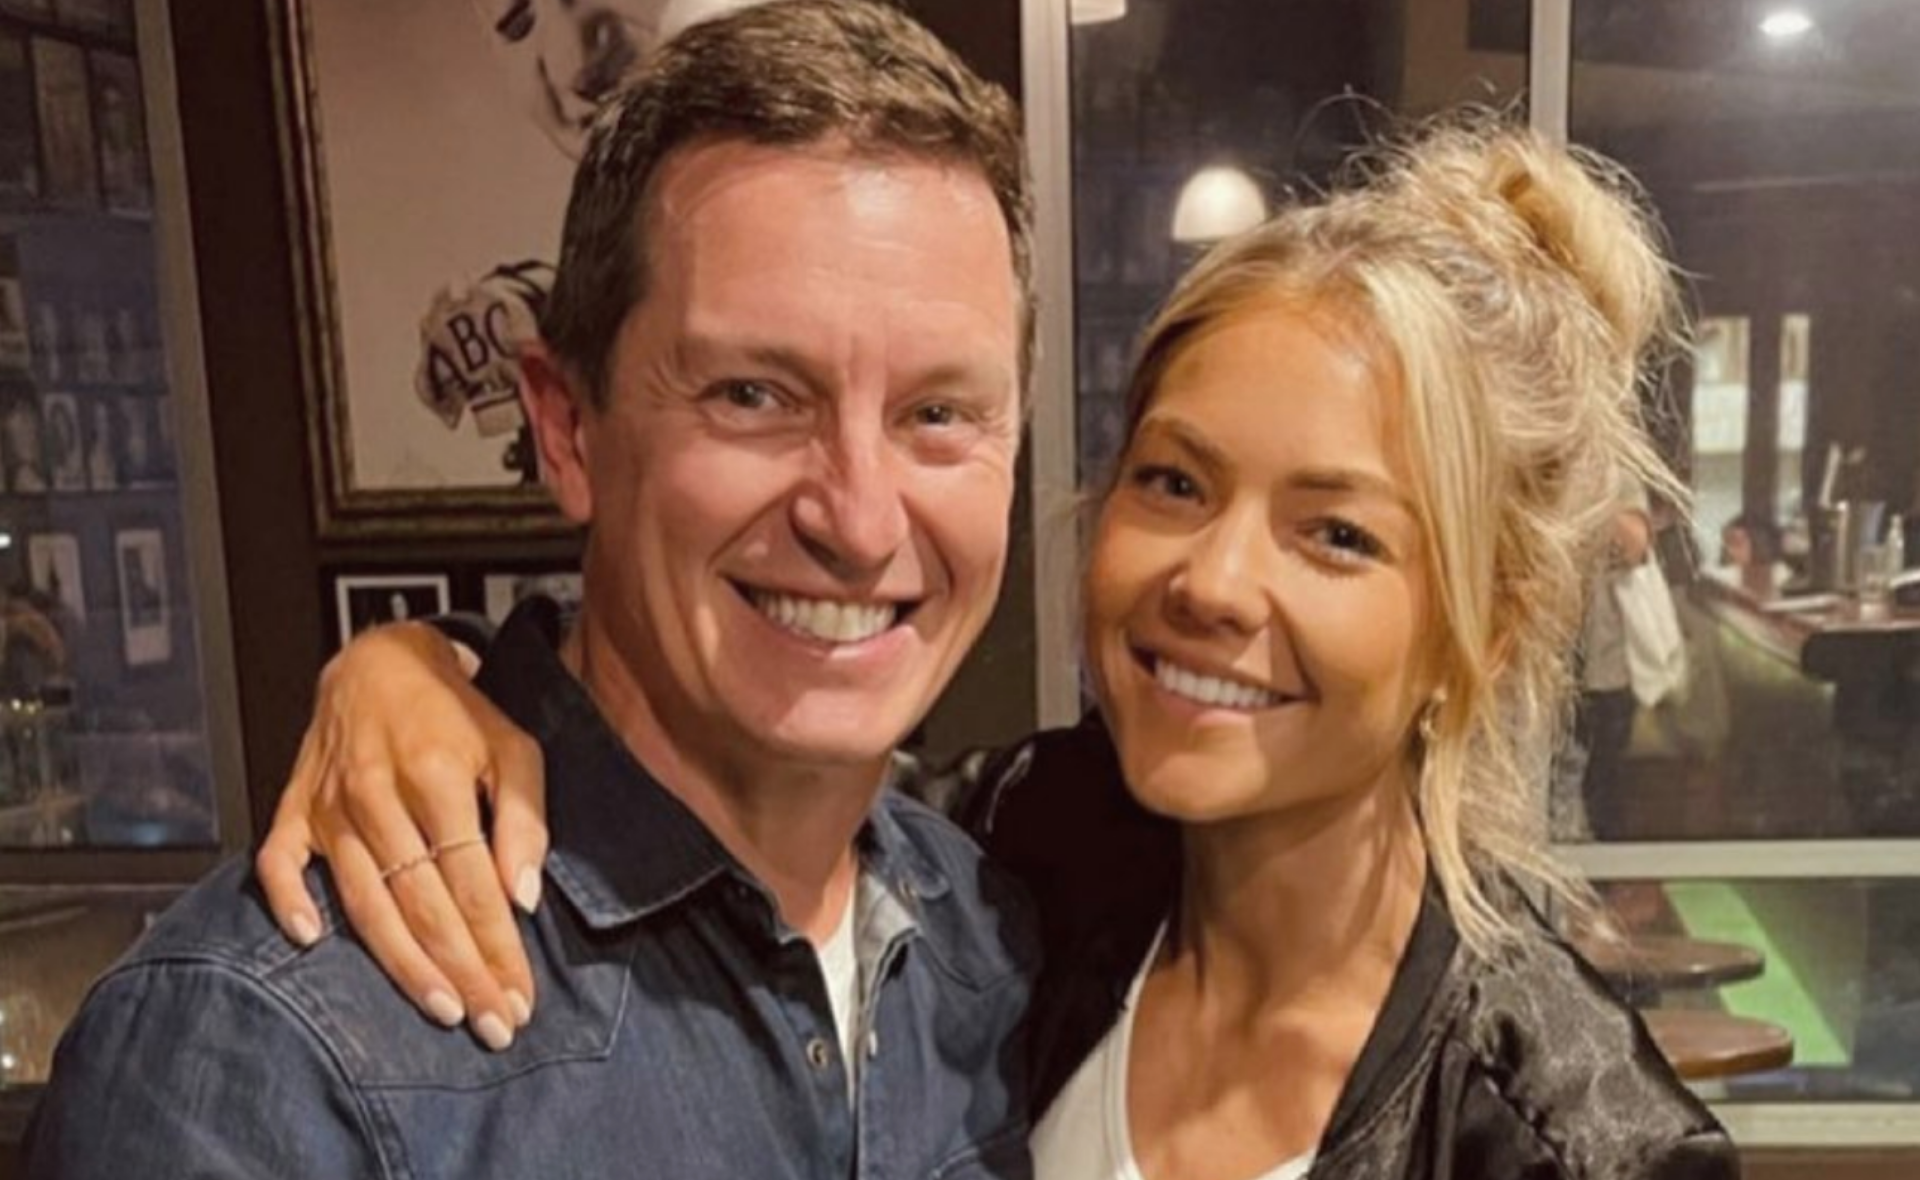 Rove McManus and Sam Frost prove they’re still best friend goals in sweet new post